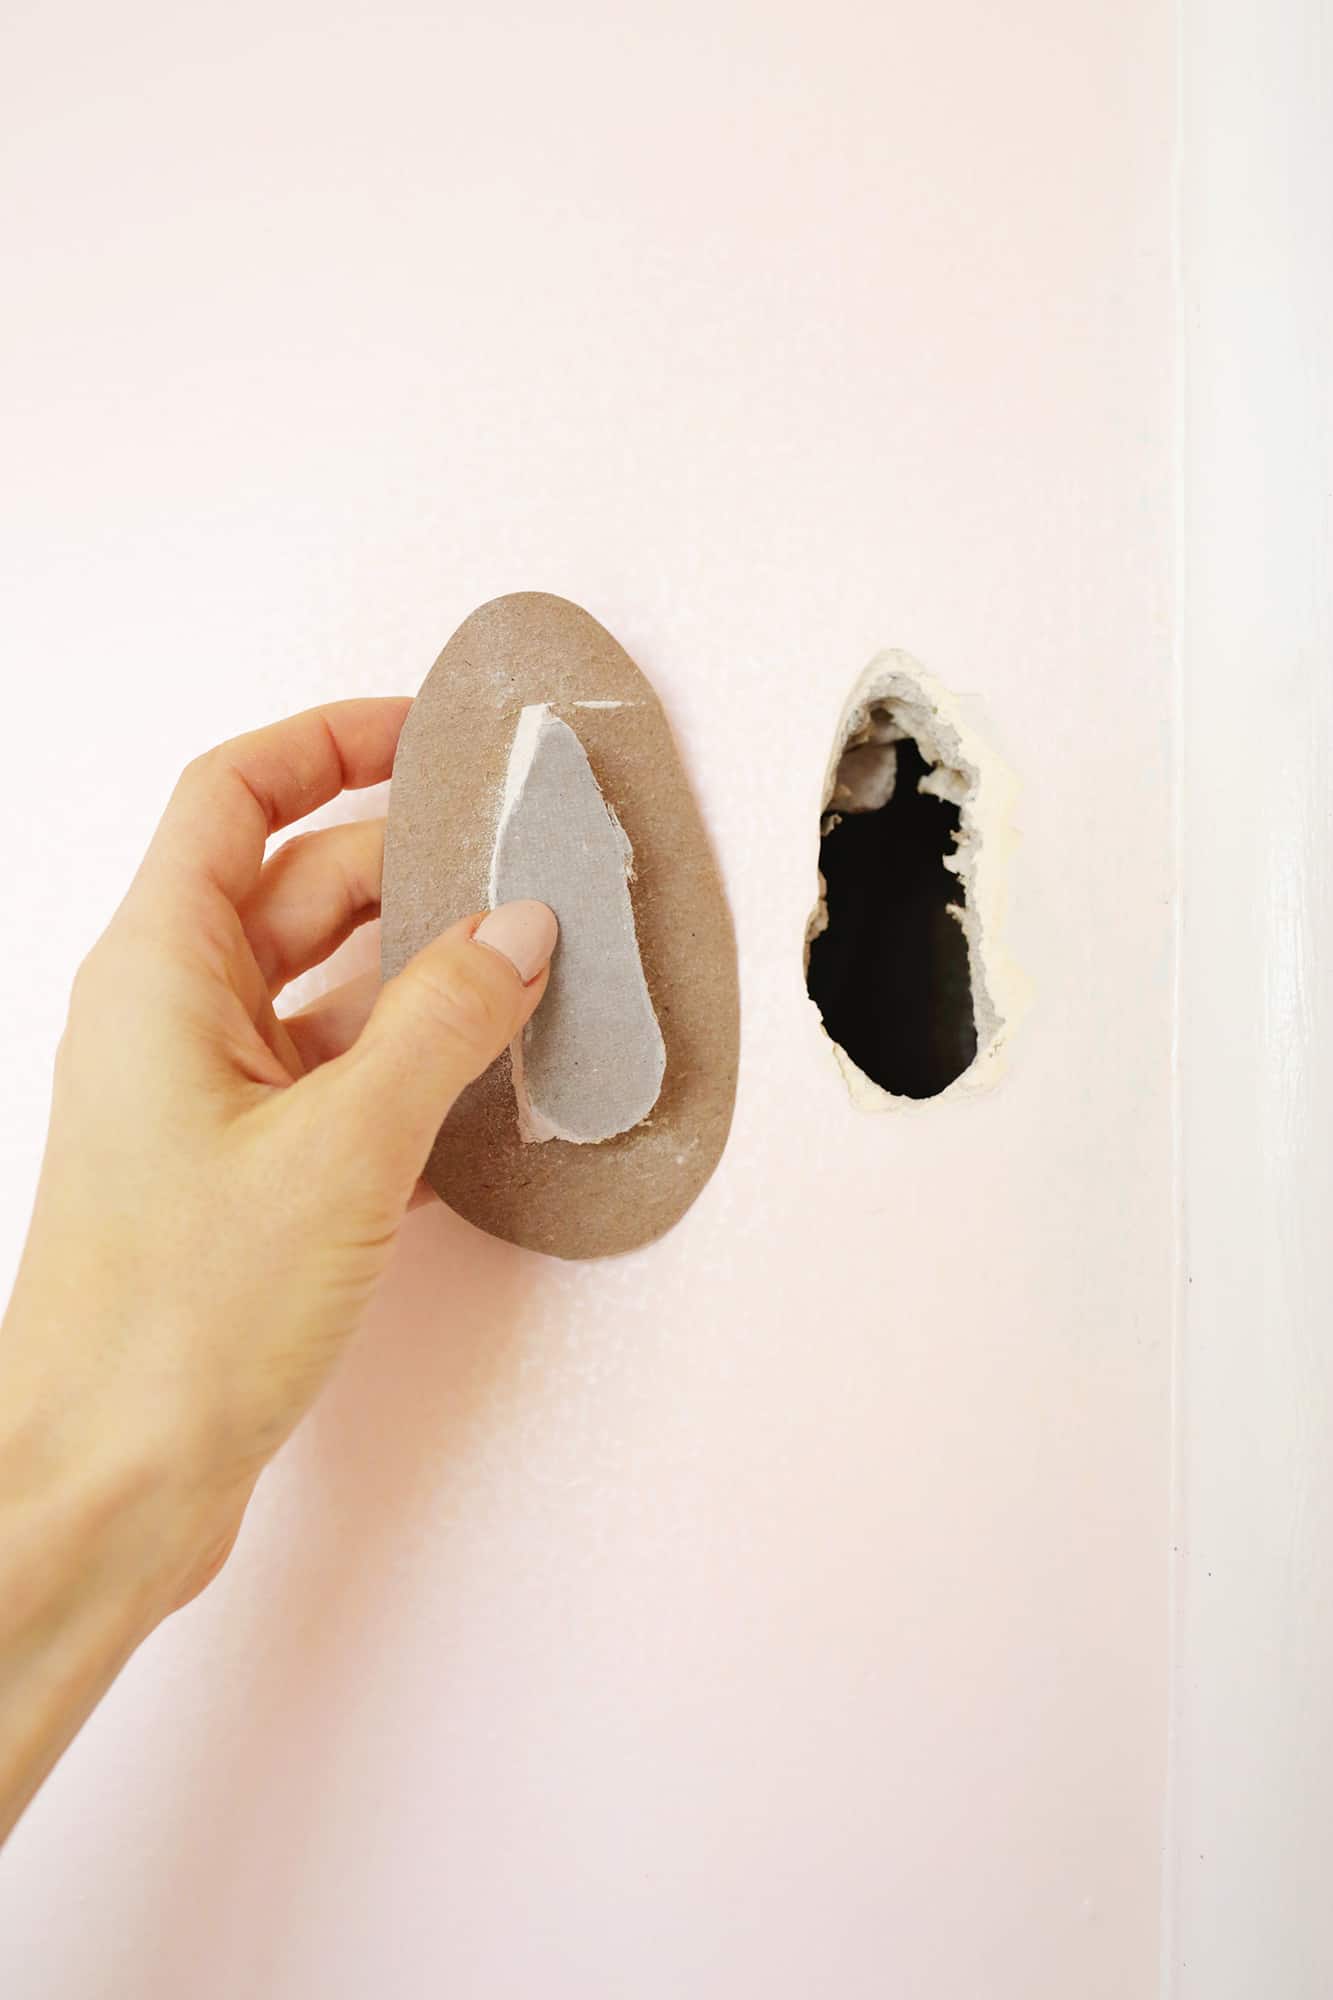 Easy Hack To Patch A Drywall Hole - A Beautiful Mess